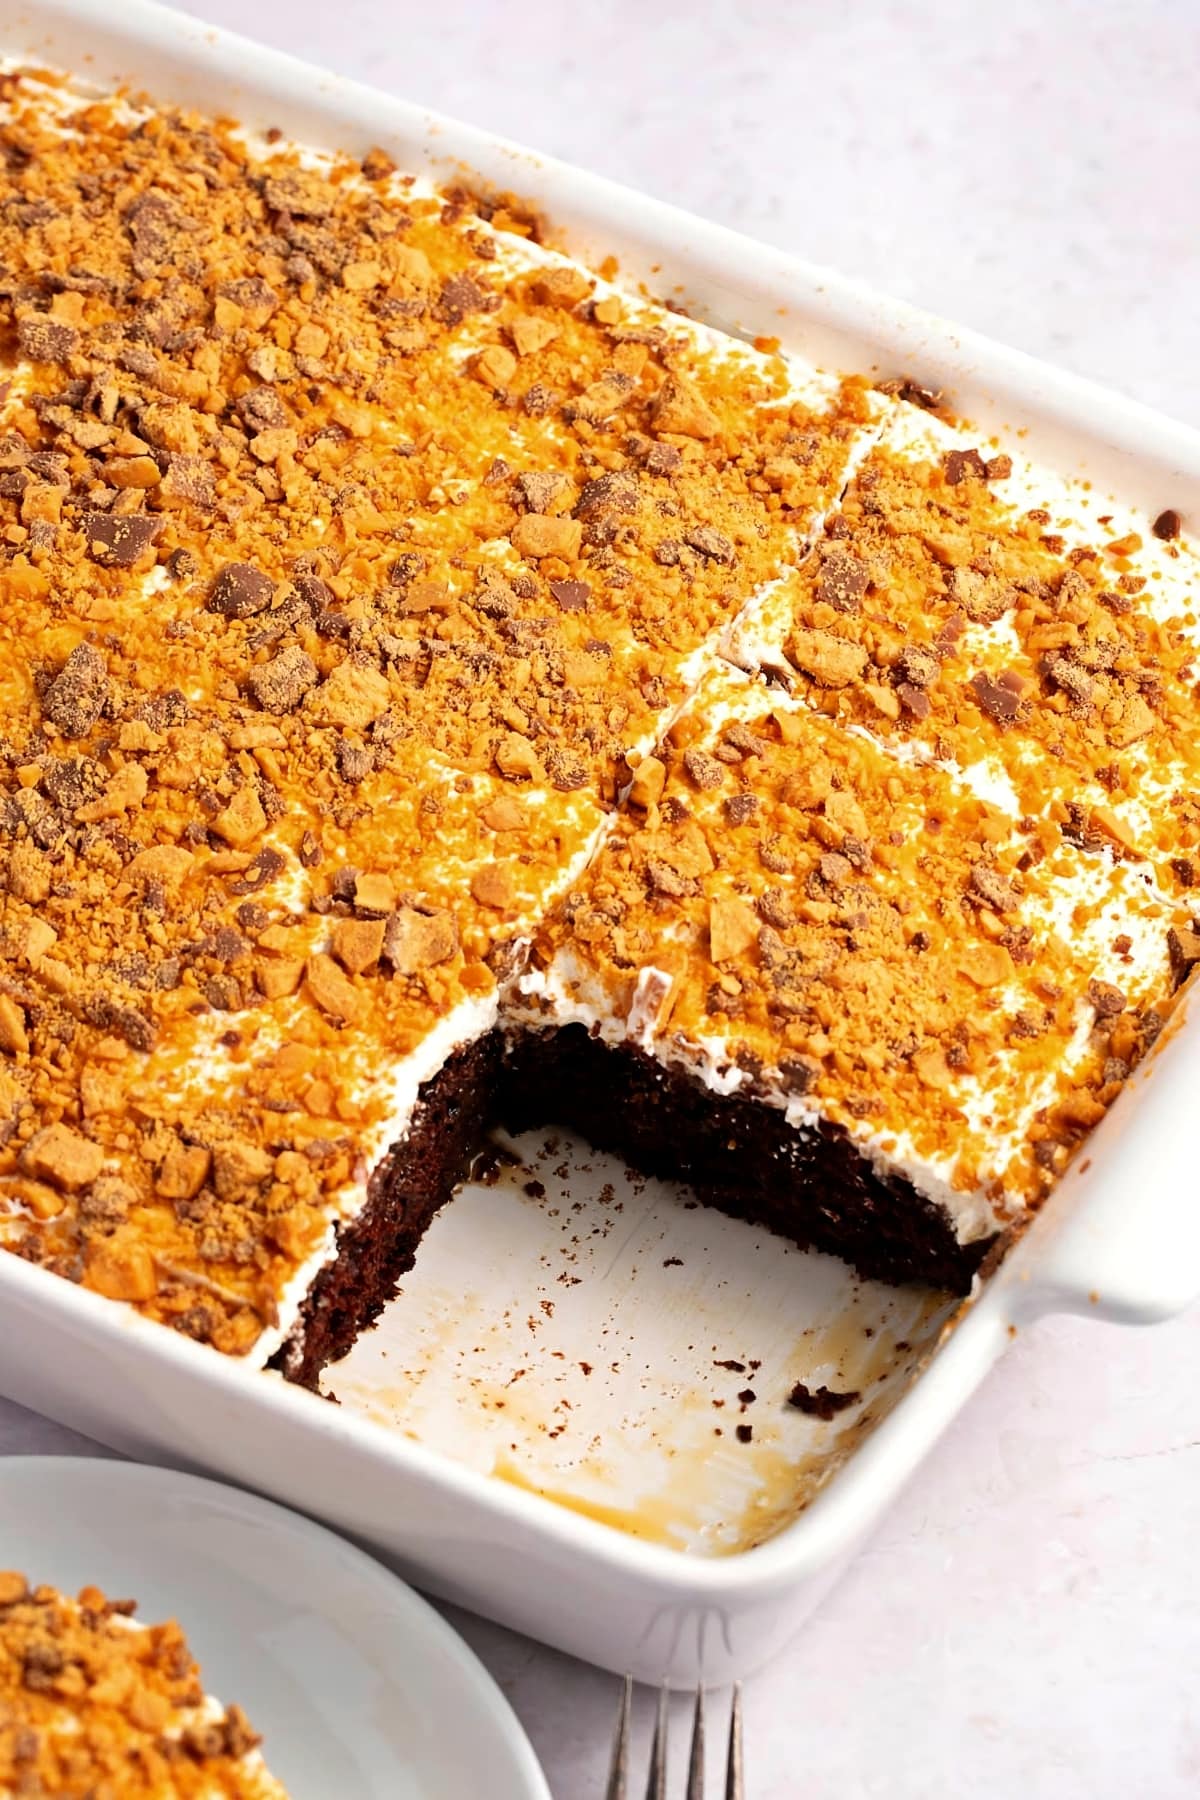 Sweet and Crunchy Holy Cow Cake in a White Casserole